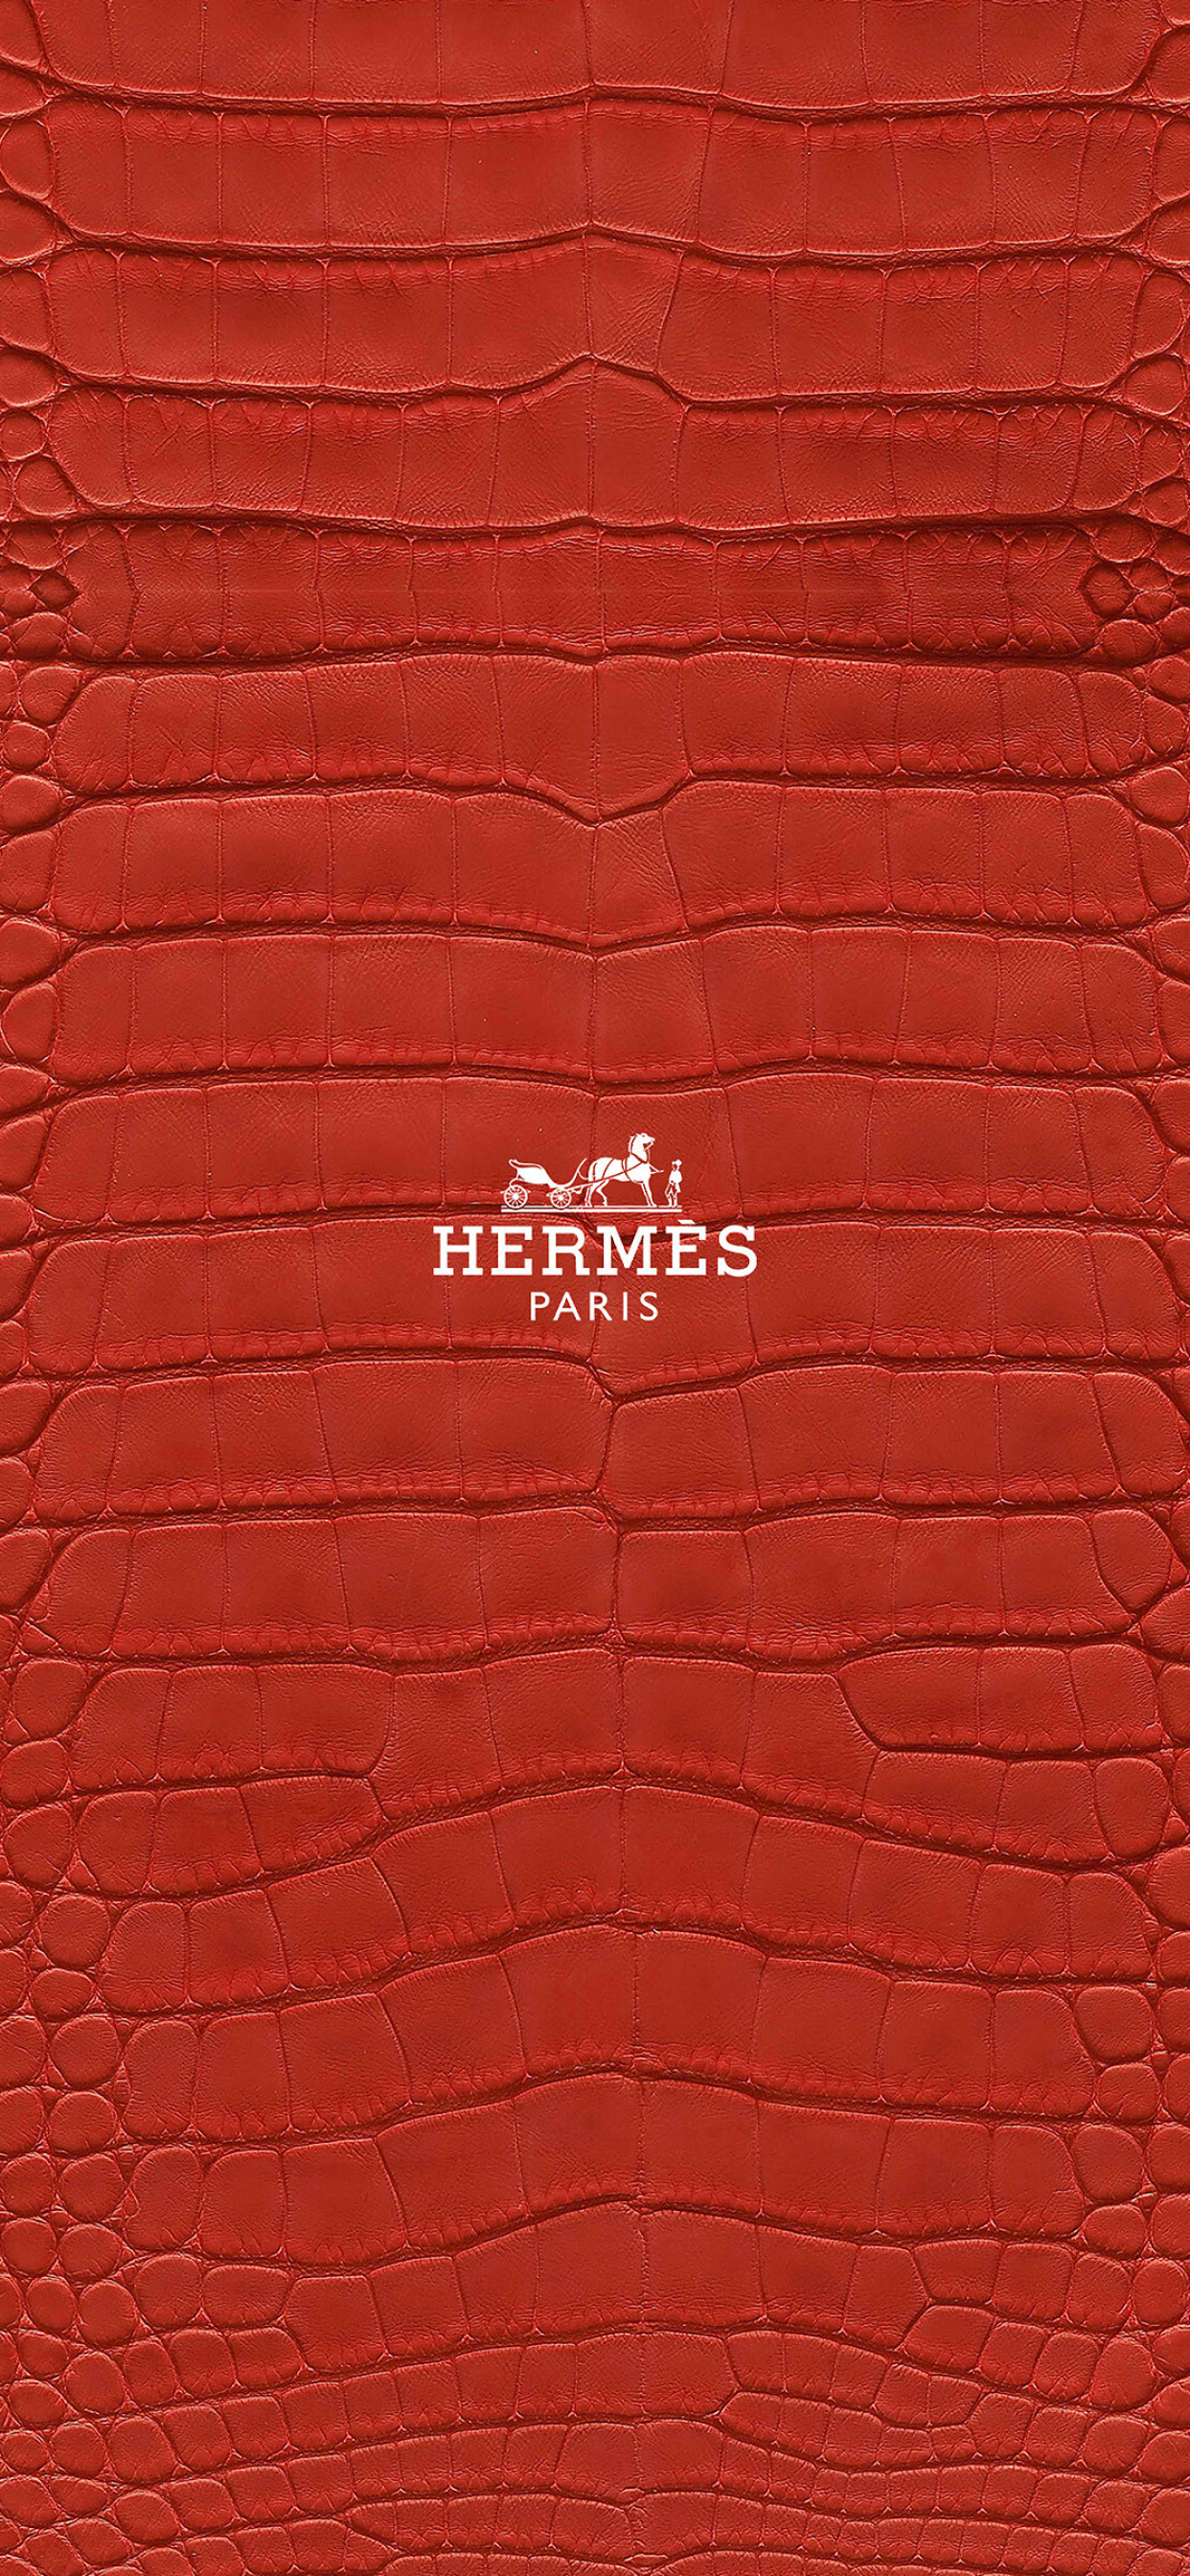 Hermes: The brand is best known for its industry-leading leather goods. 1250x2690 HD Wallpaper.